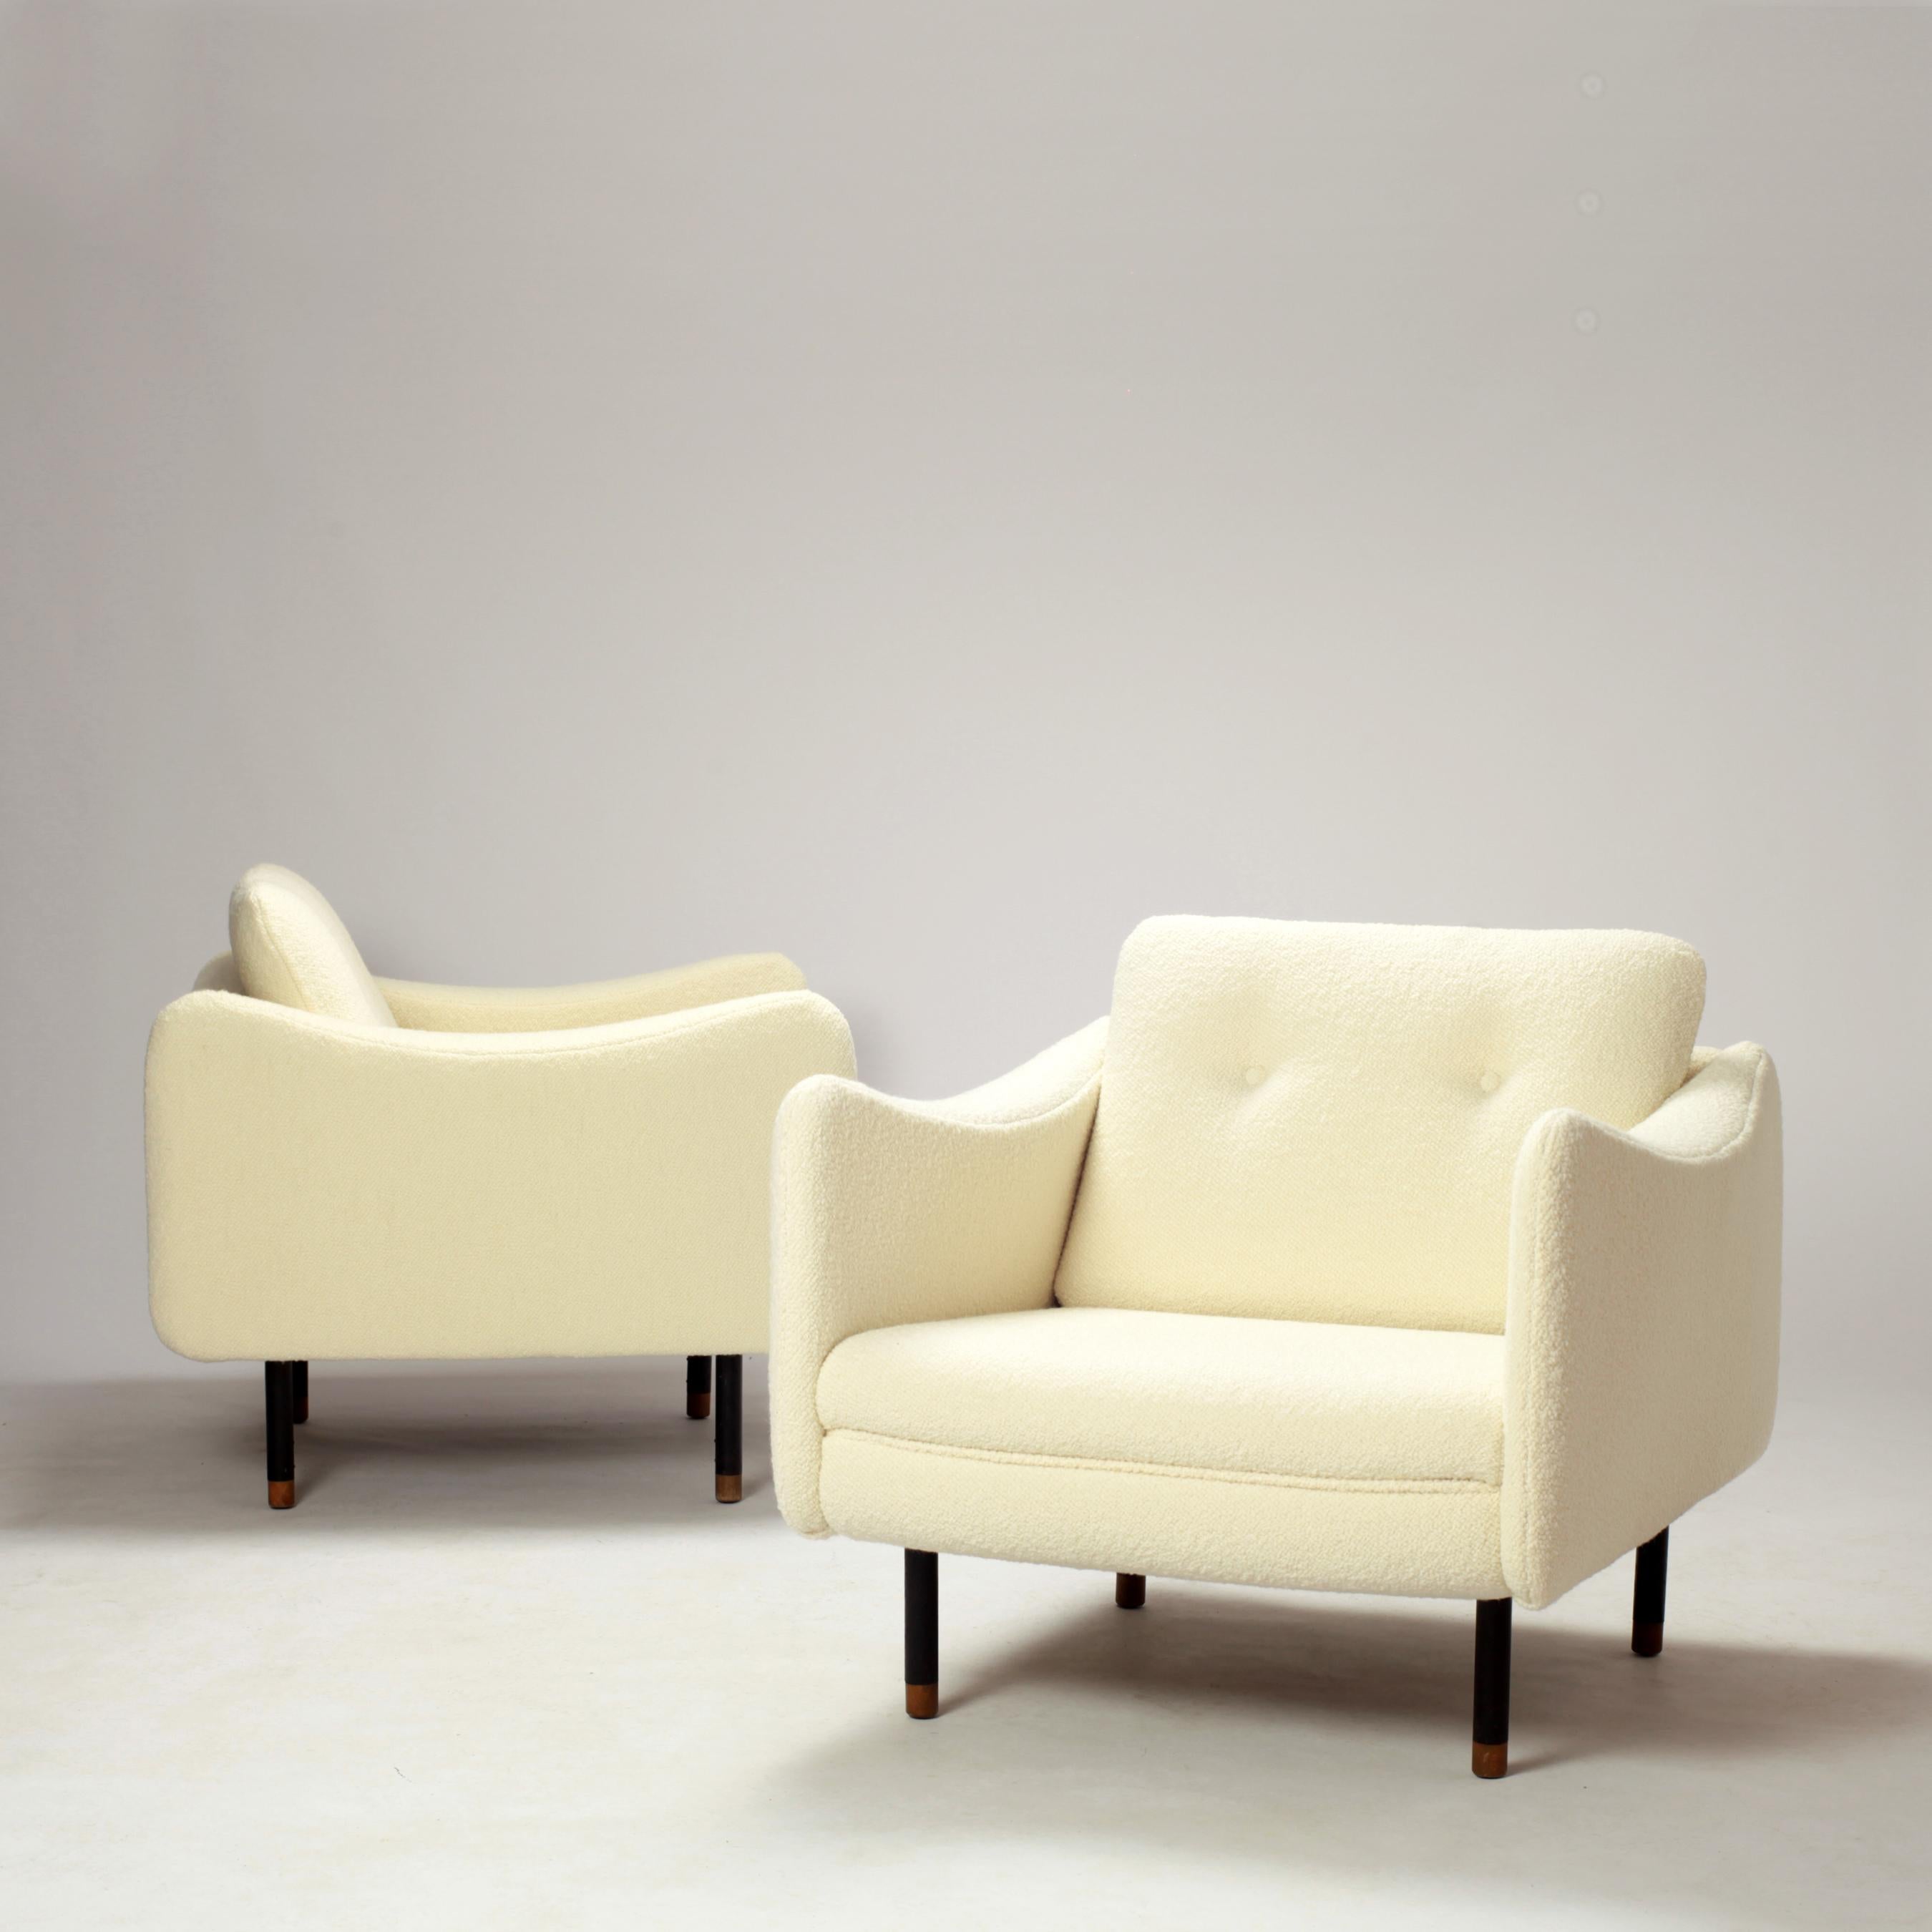 Nice Michel Mortier Teckel or SF116 pair of armchairs for Steiner designed in 1963, newly upholstered in beautiful ivory Pierre Frey fabric.
The armchair foot are made with wood and black lacquered metal.
The metal label of the manufacturer is